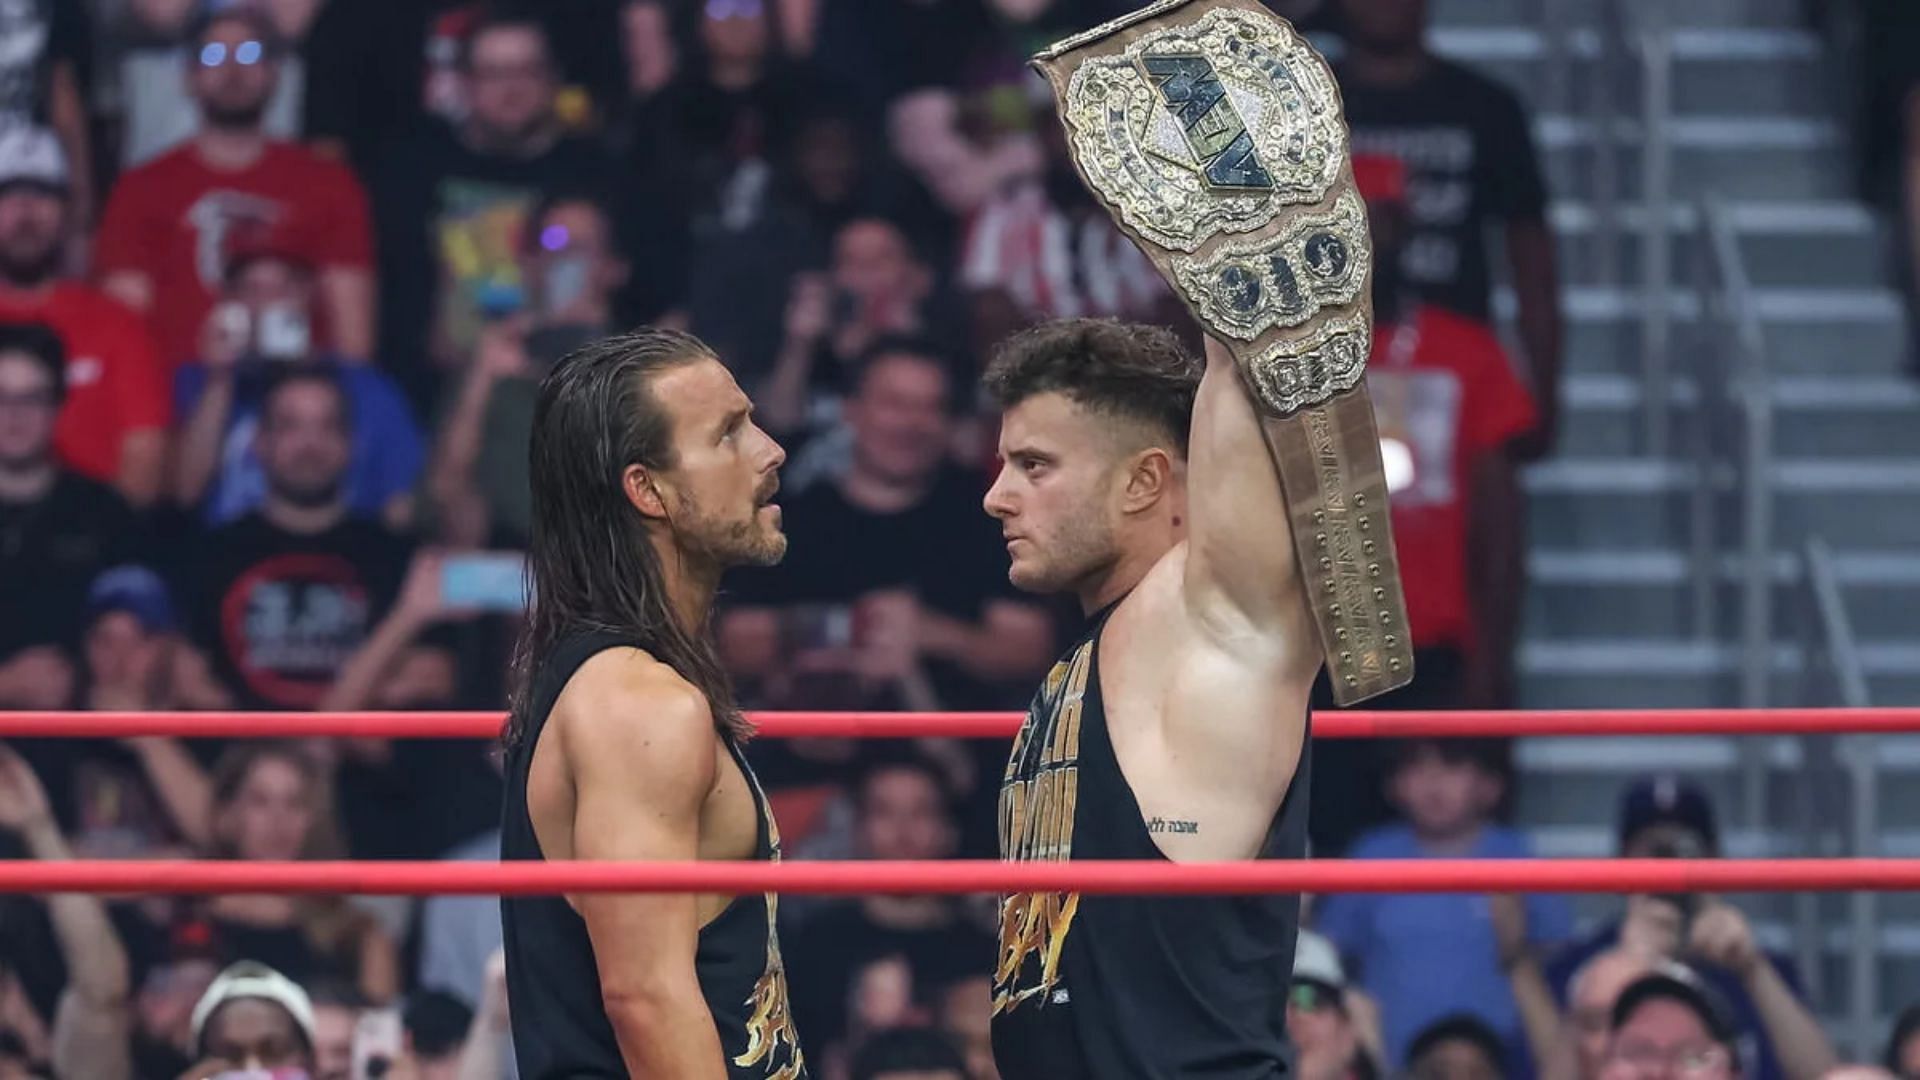 Better Than You BayBay recently clashed for the AEW World Championship.